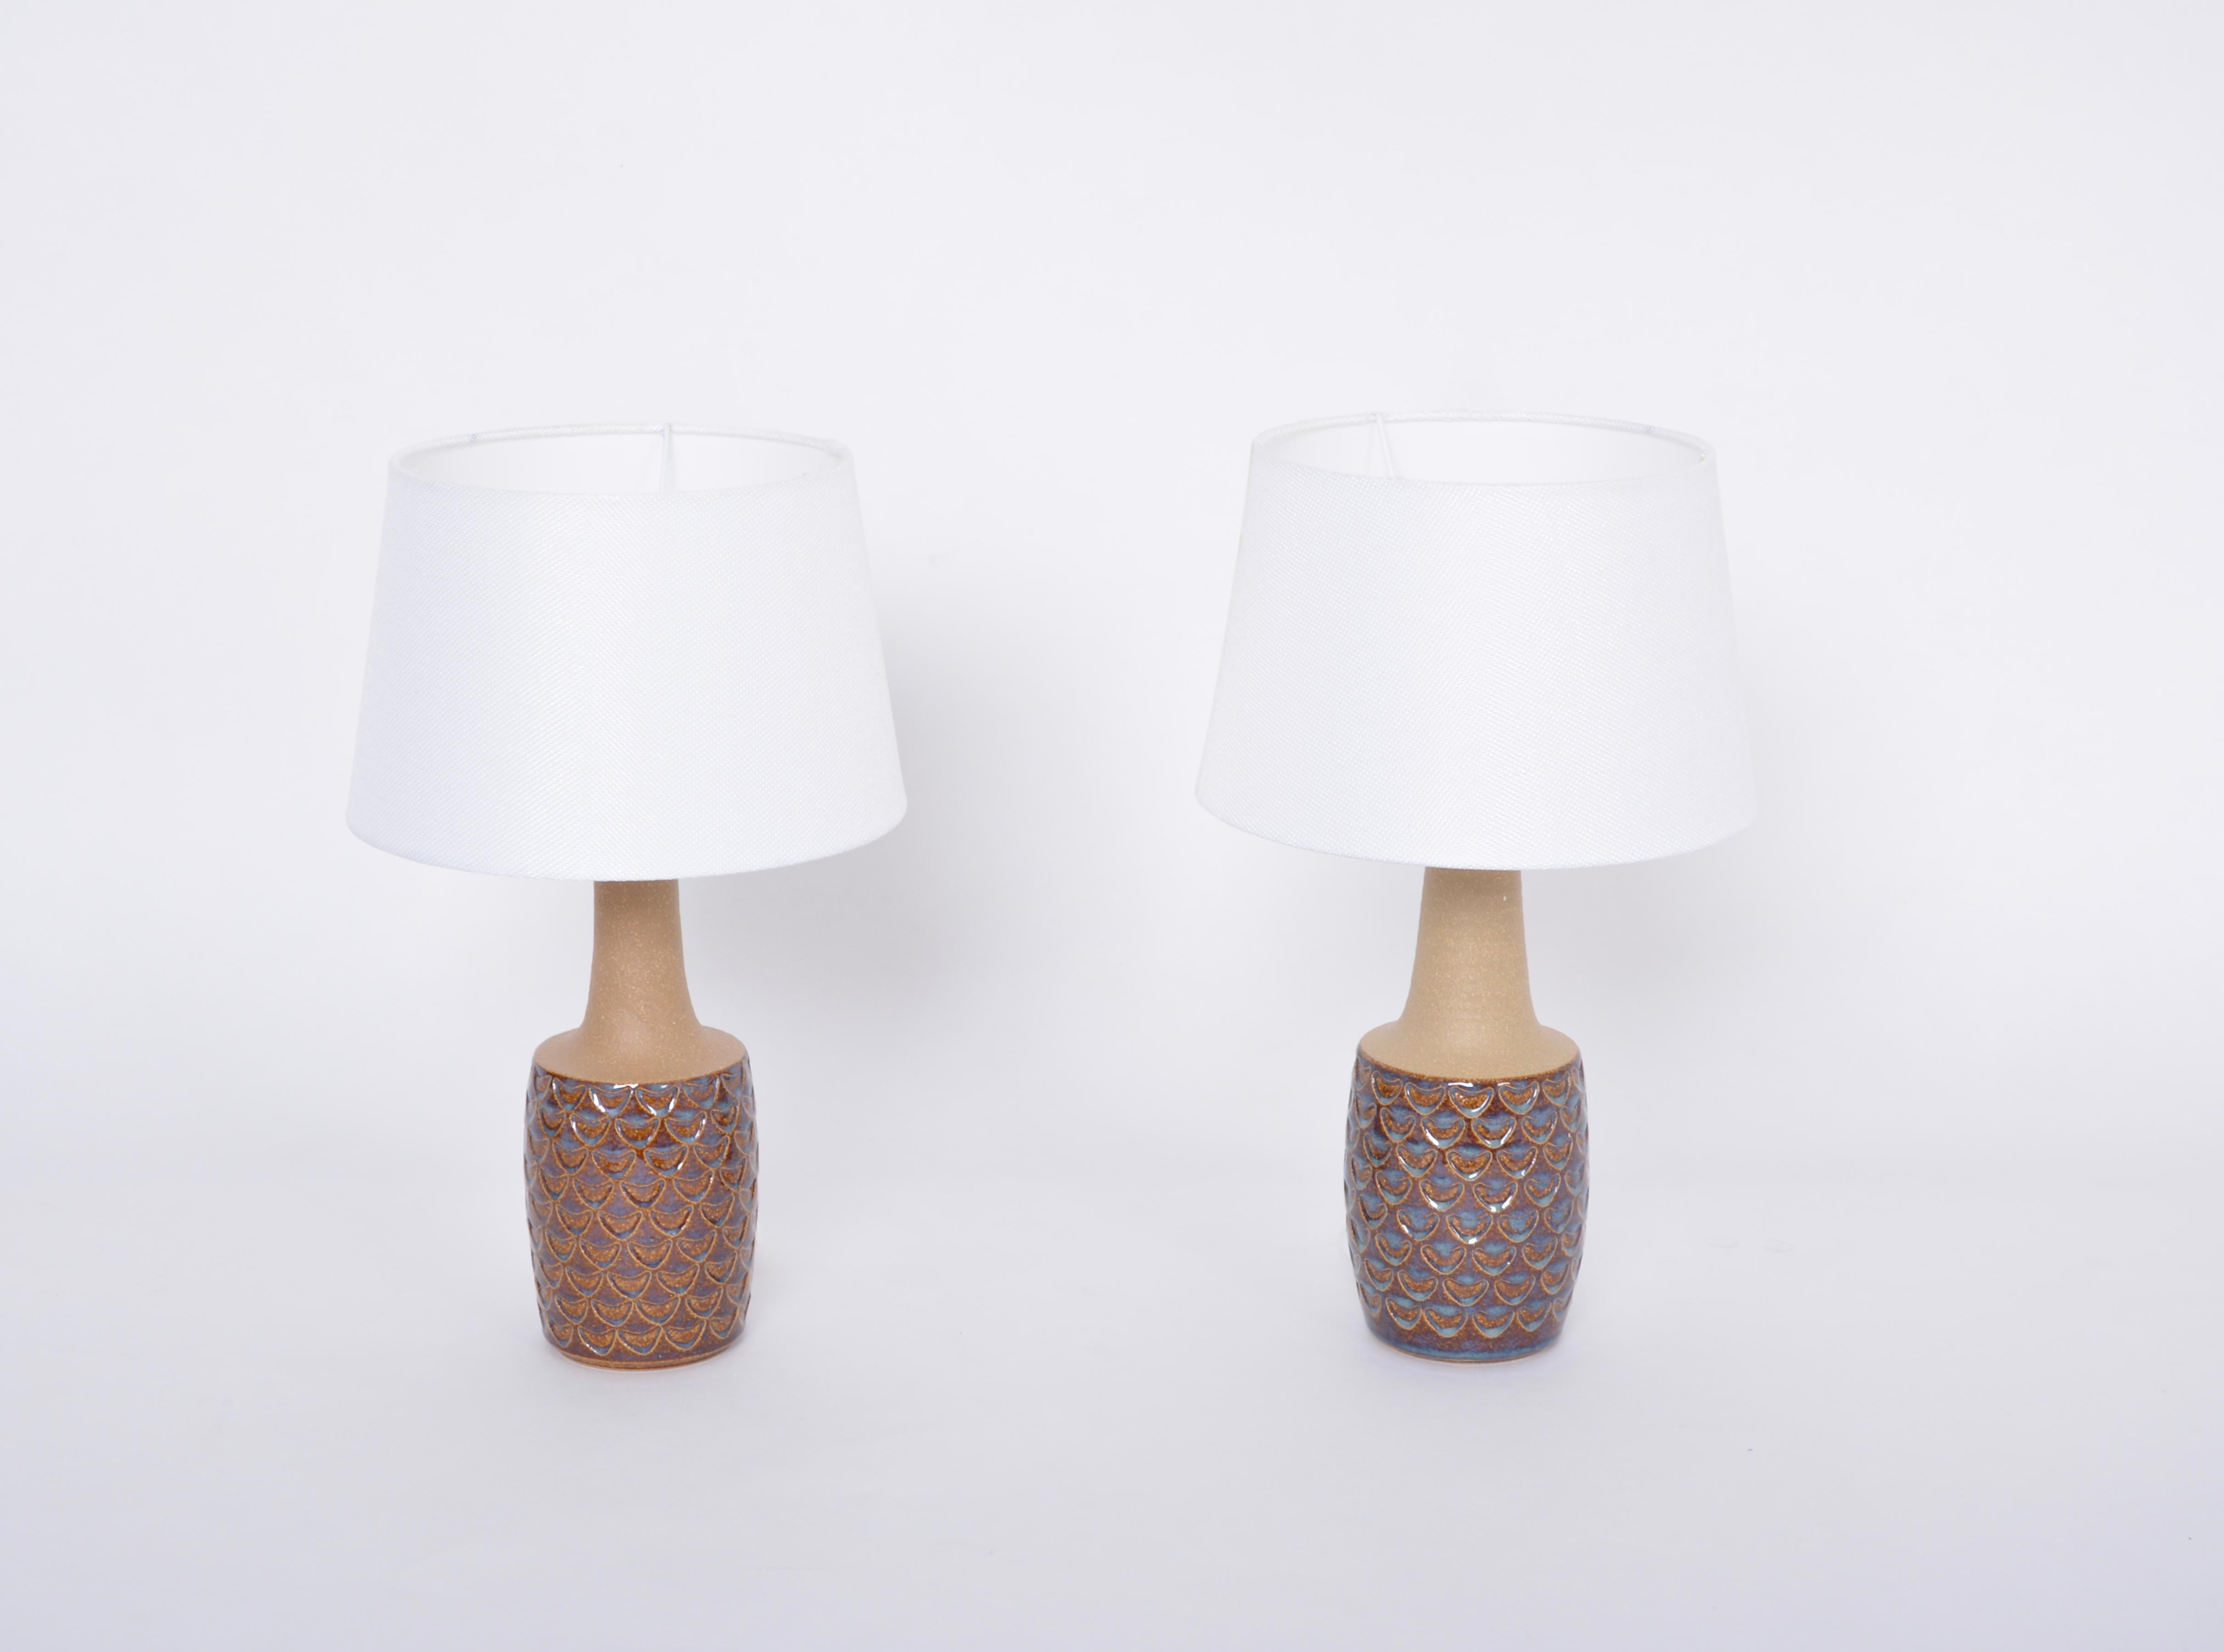 Pair of midcentury Handmade Stoneware table lamps model 3001 by Einar Johansen for Soholm

This pair of stoneware table lamps was designed by Einar Johansen and handmade on the Danish island of Bornholm by the company Soholm Stentoj (stoneware in